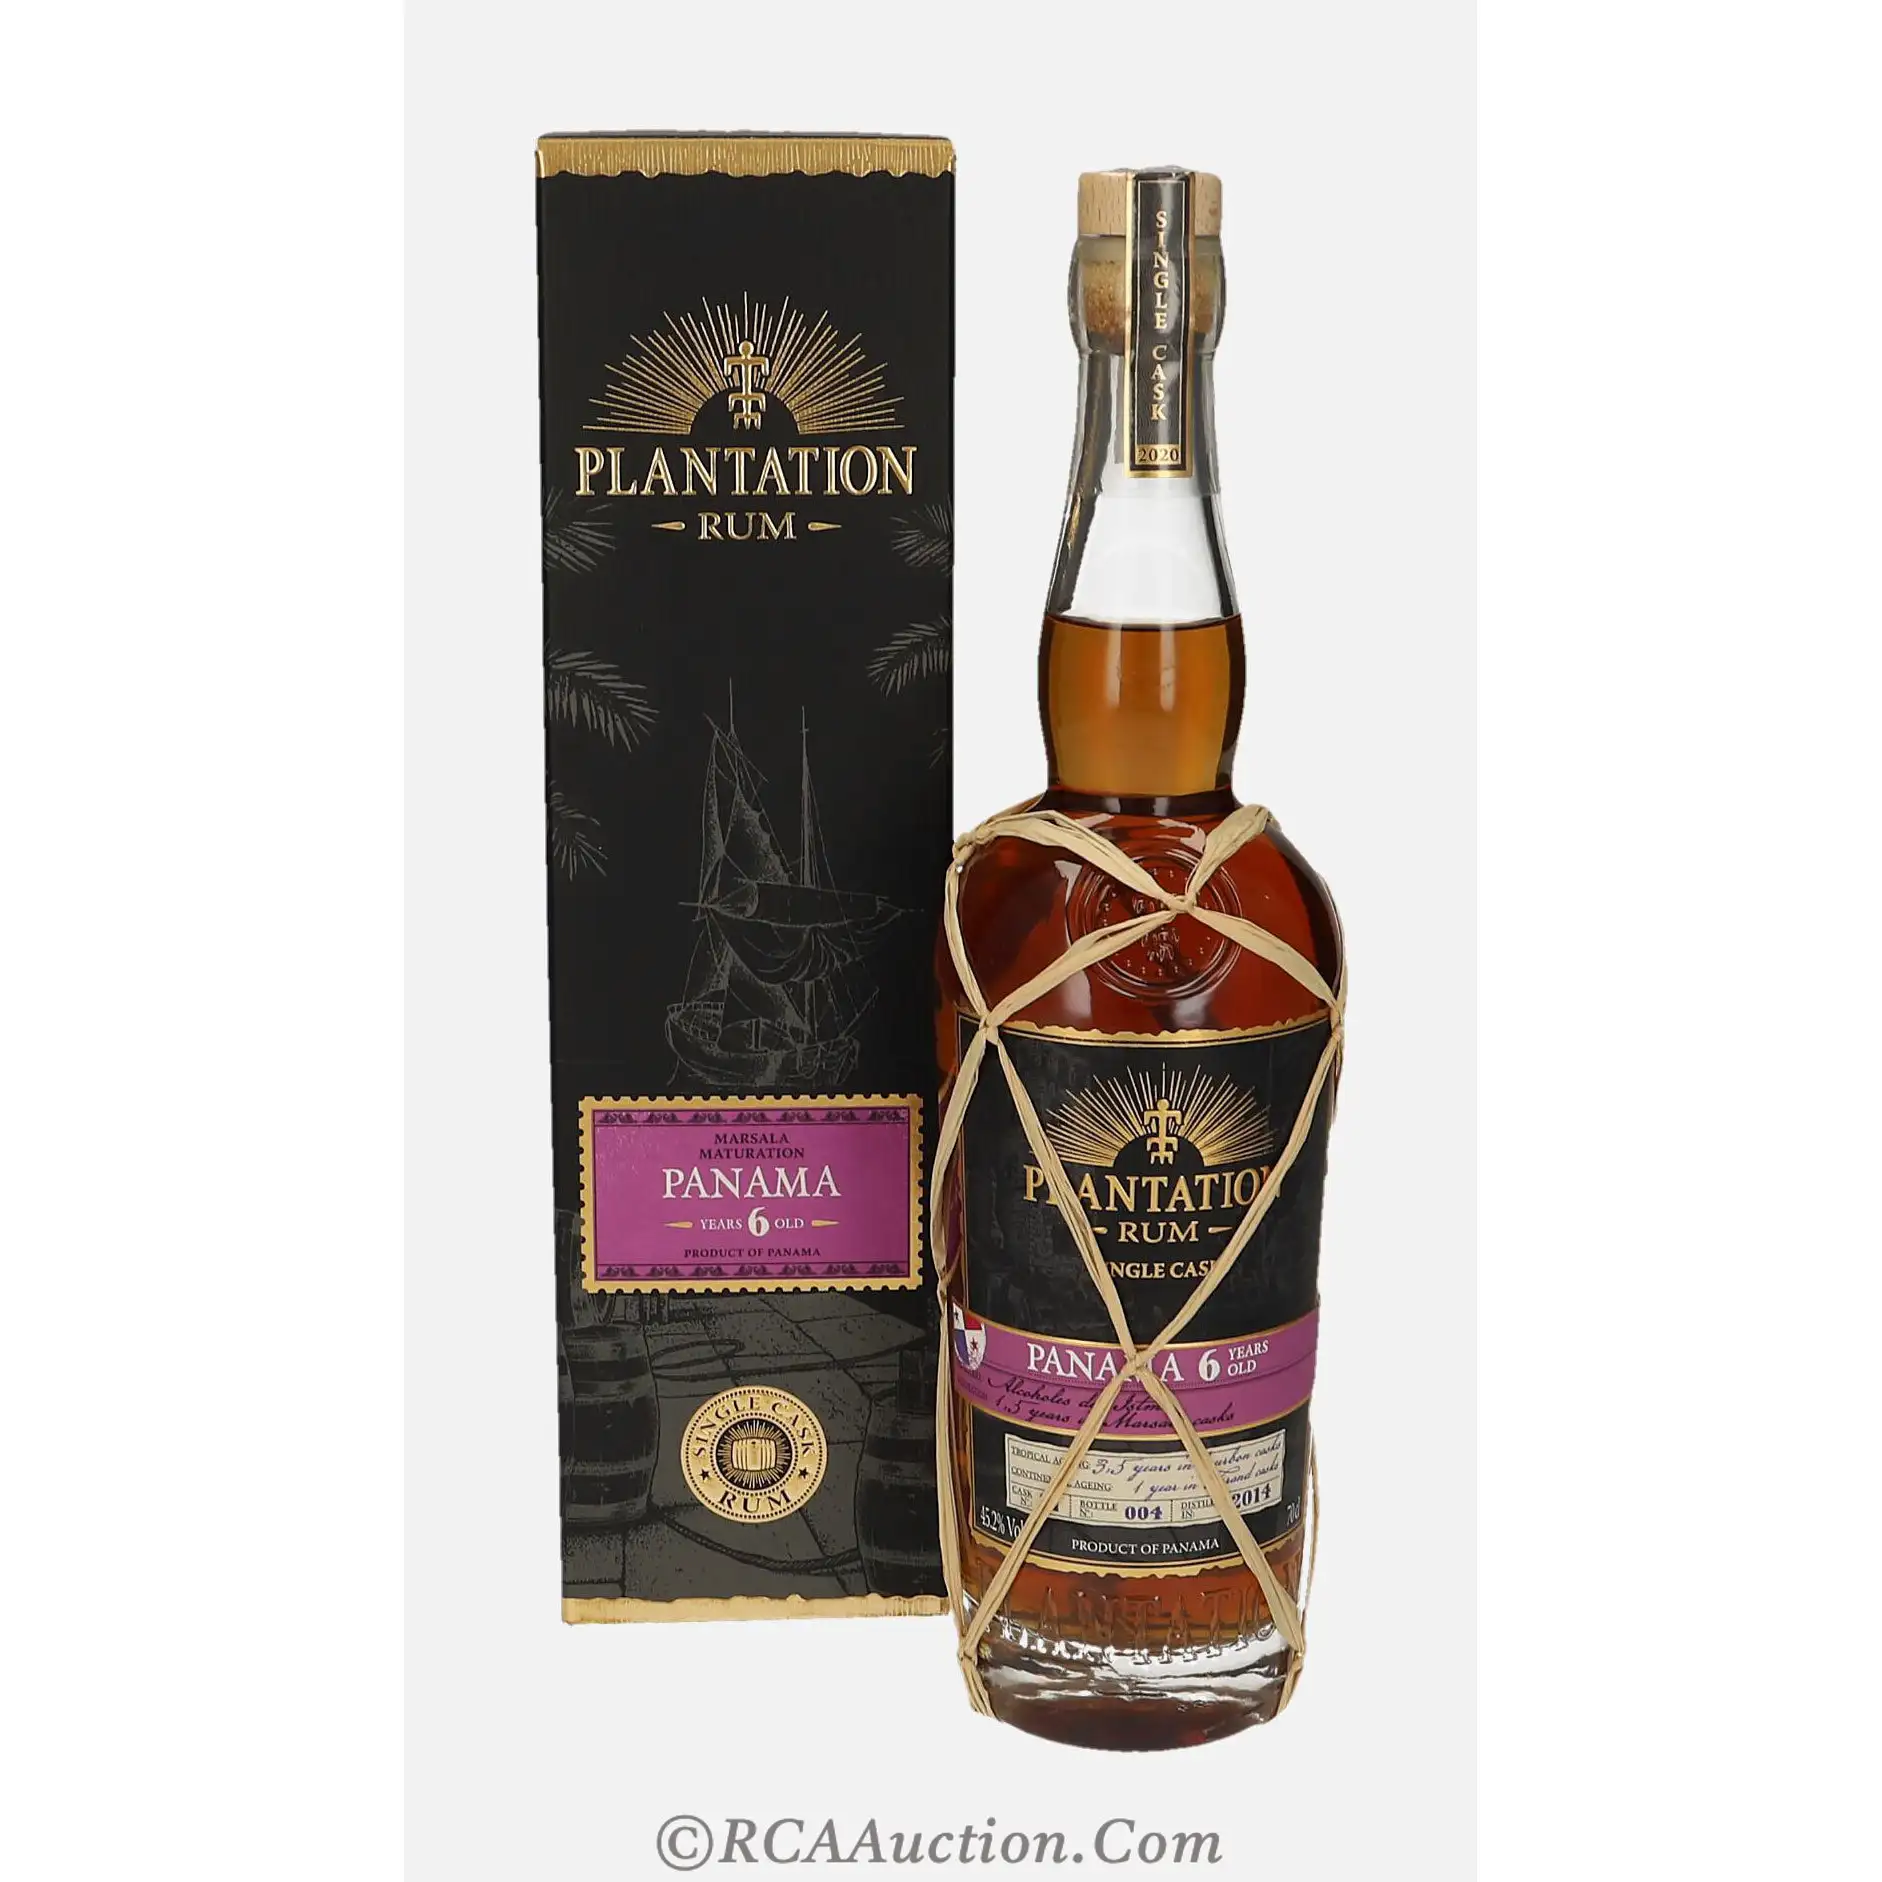 Image of the front of the bottle of the rum Plantation Panama